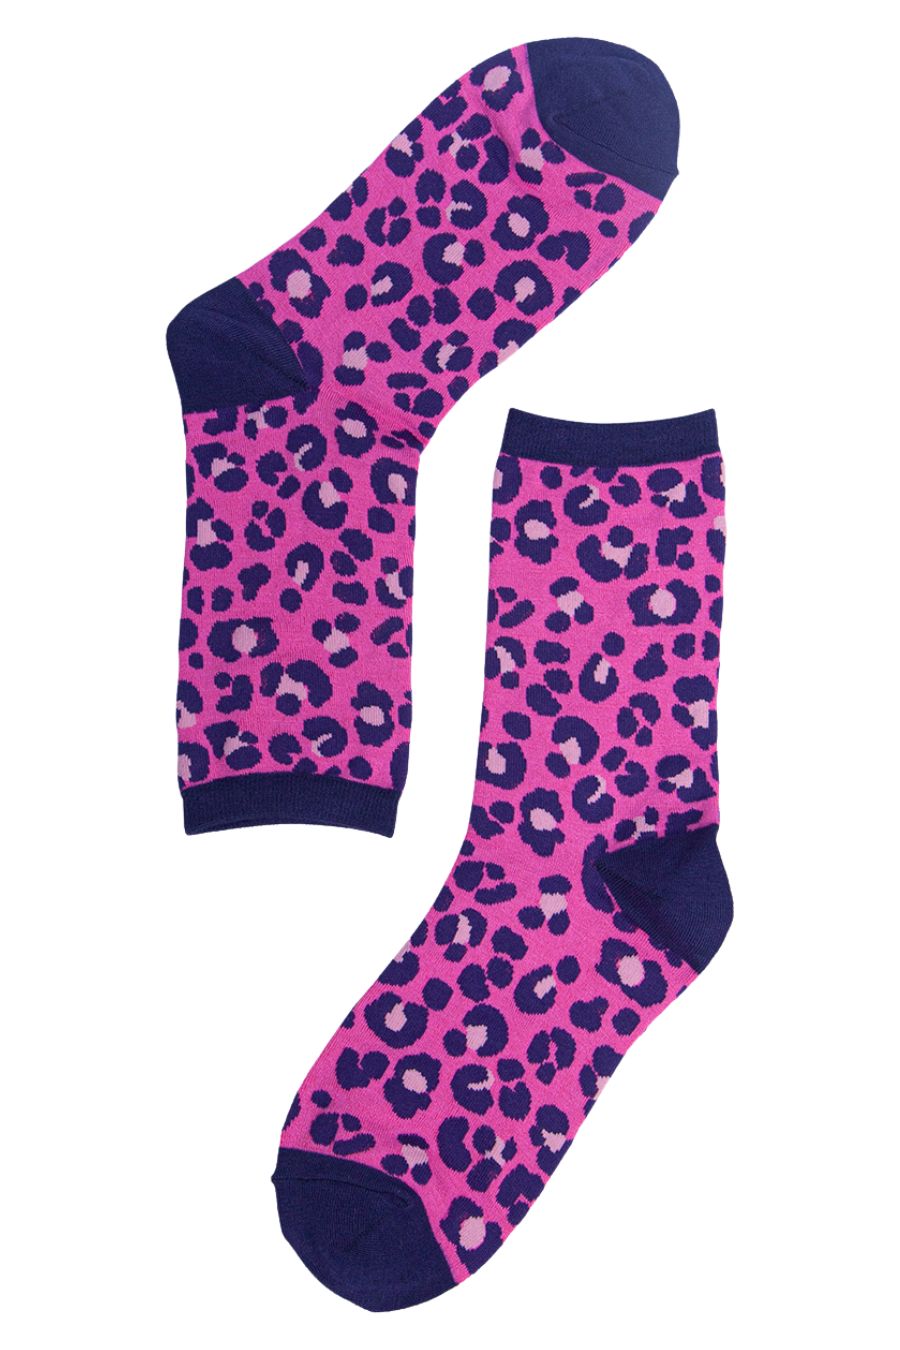 pink leopard print bamboo ankle socks 